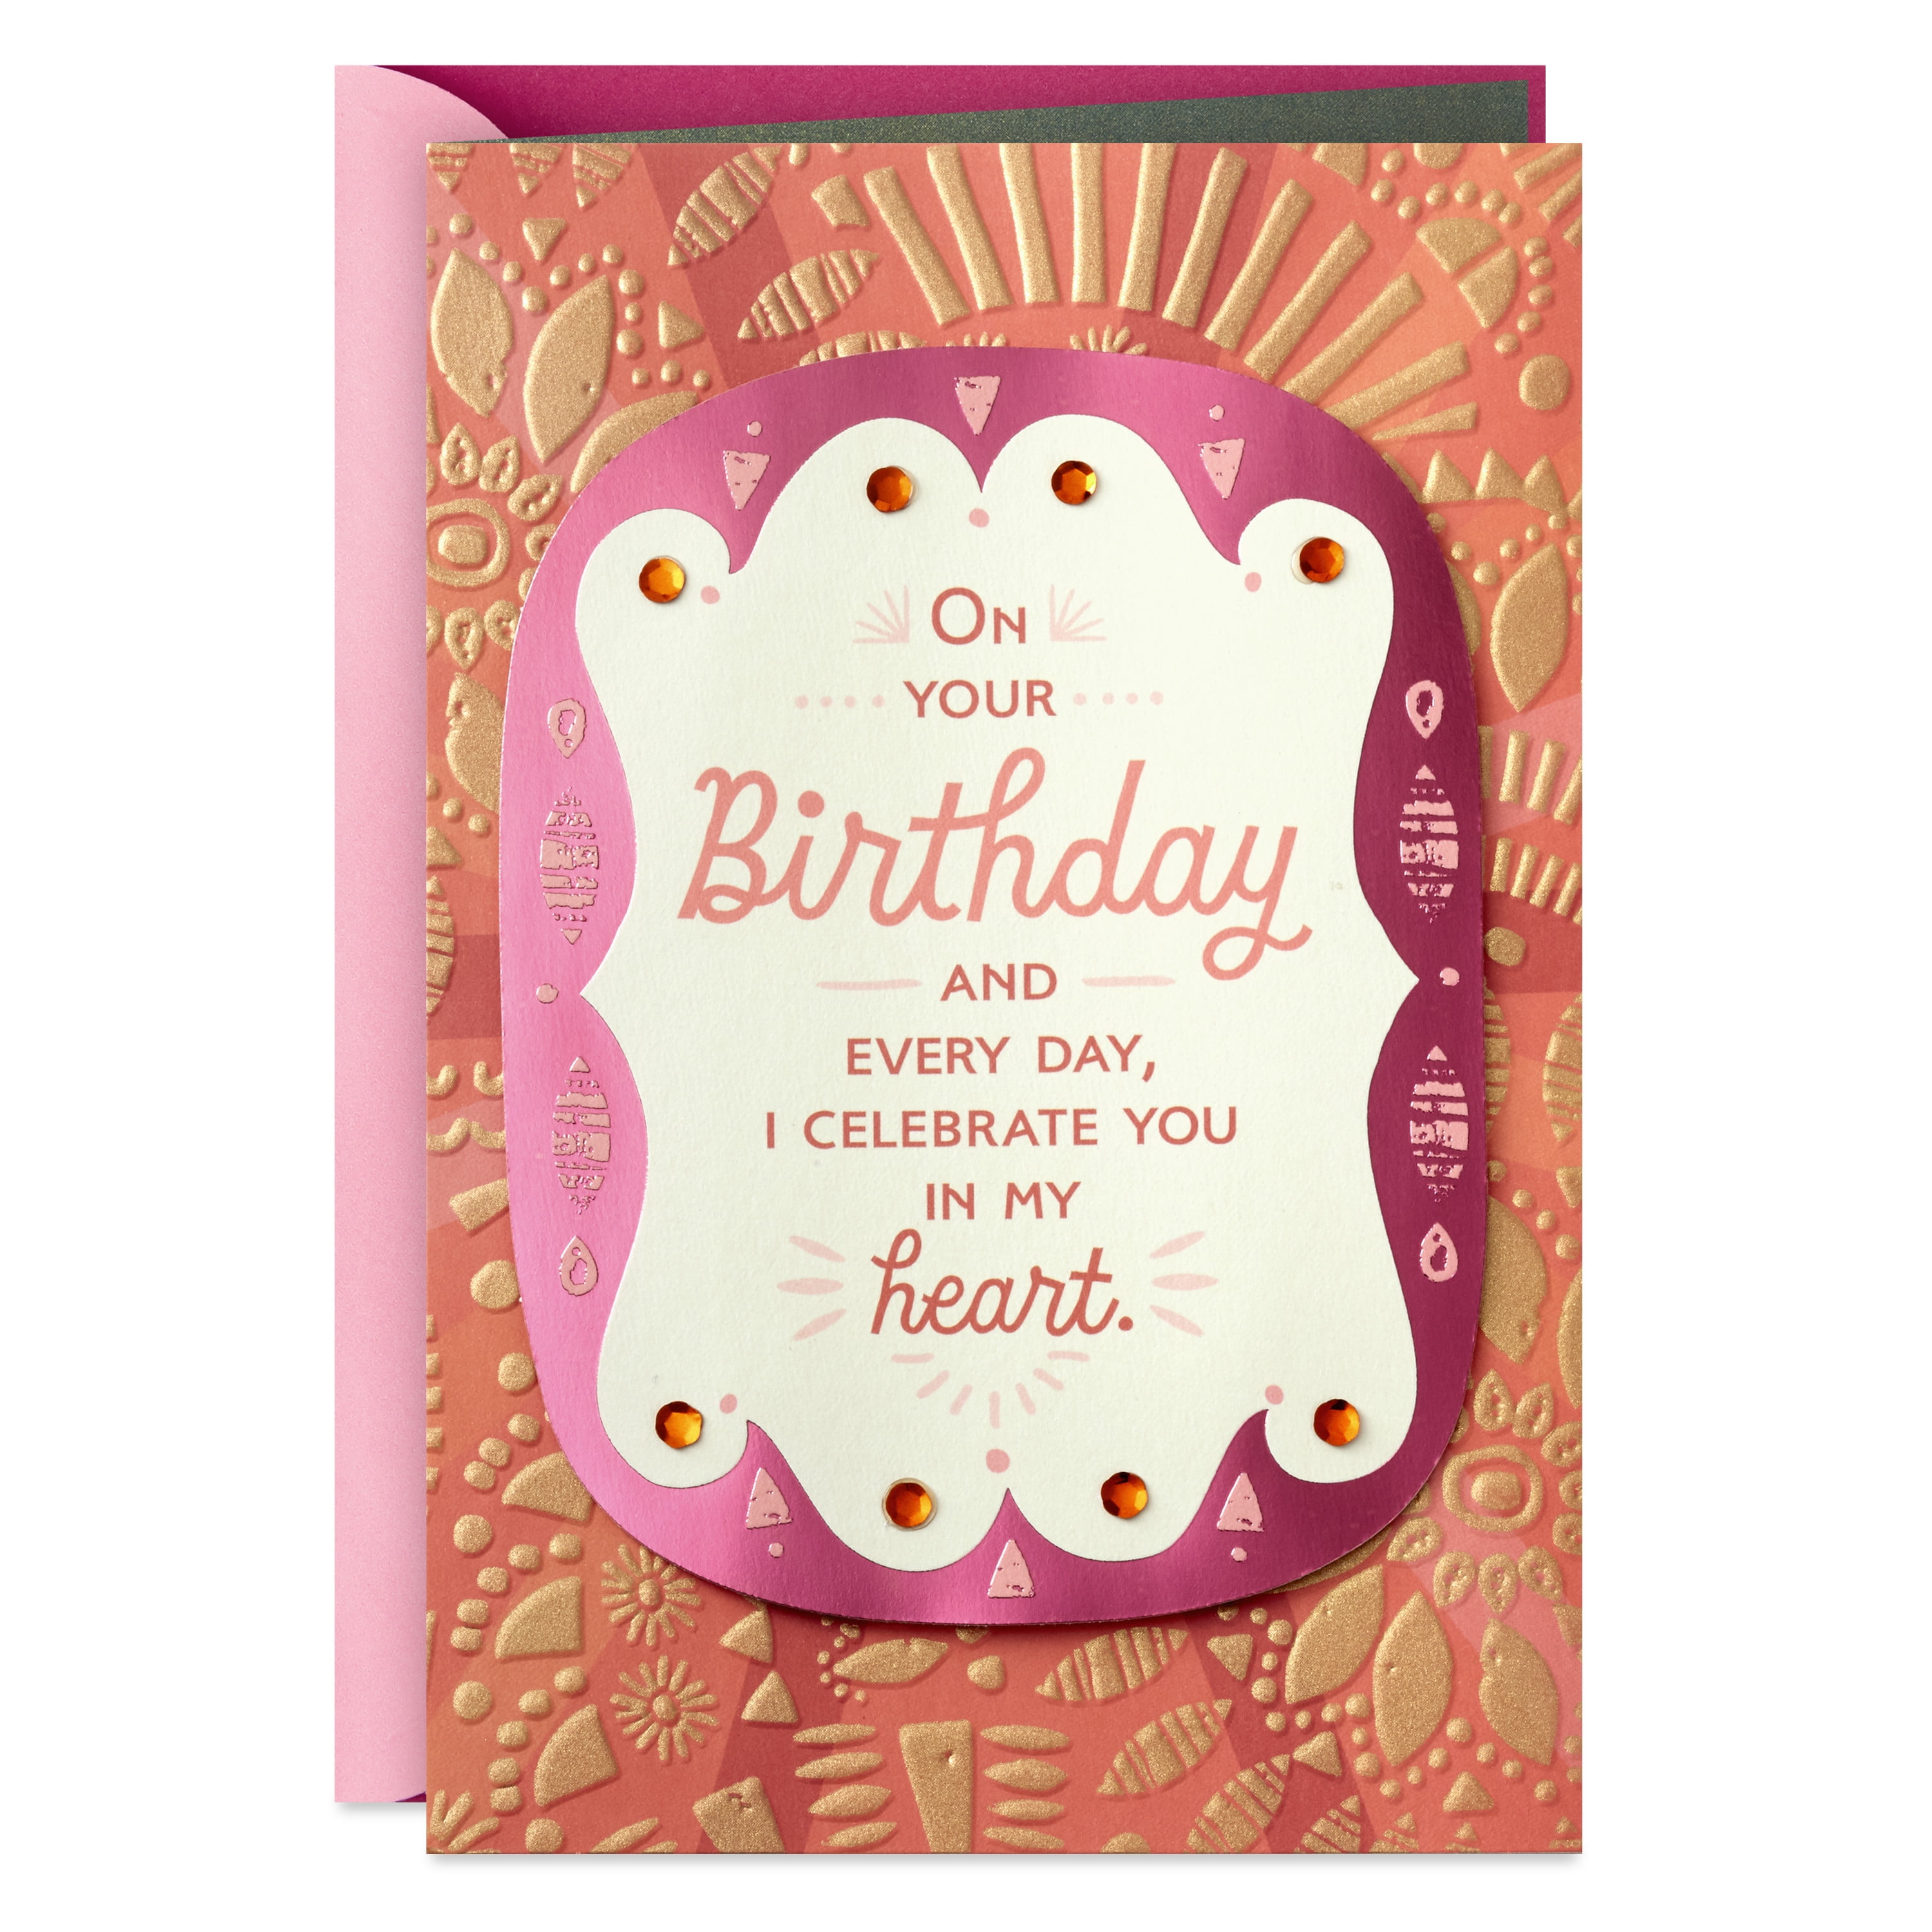 I Celebrate You! Happy Birthday Card for Mother, Birthday & Greeting Cards  by Davia